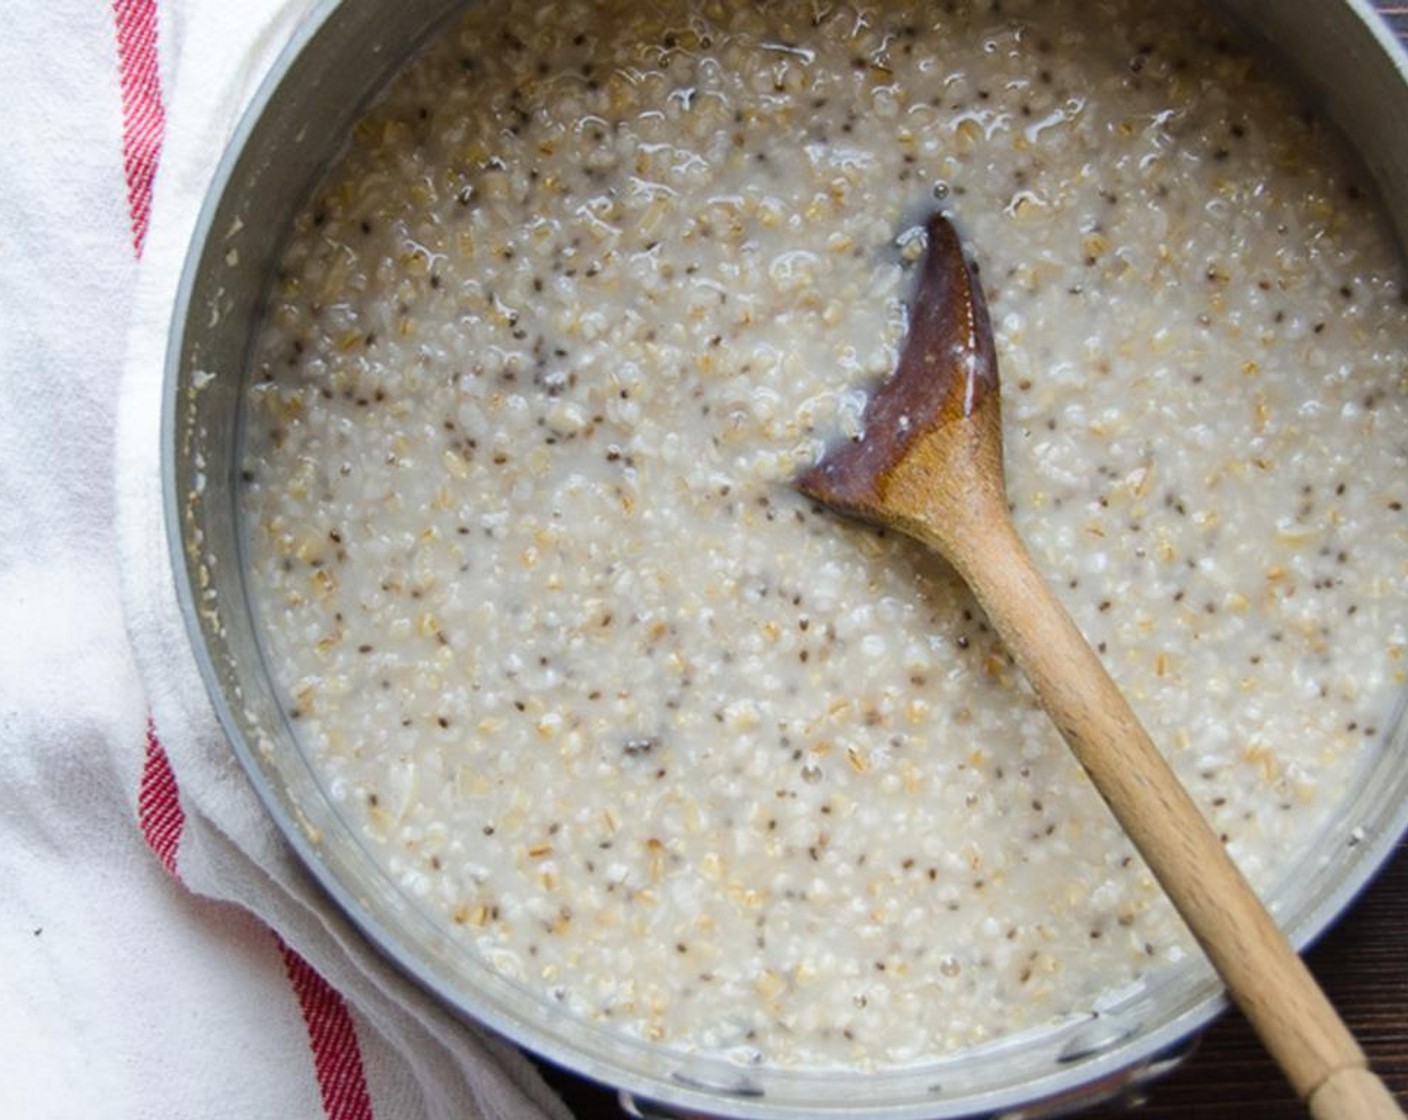 step 3 Transfer the oatmeal to a tupperware container to store throughout the week. When you're ready for a bowl of oatmeal, spoon into a microwave safe bowl and nuke for one to one and a half minutes until hot.